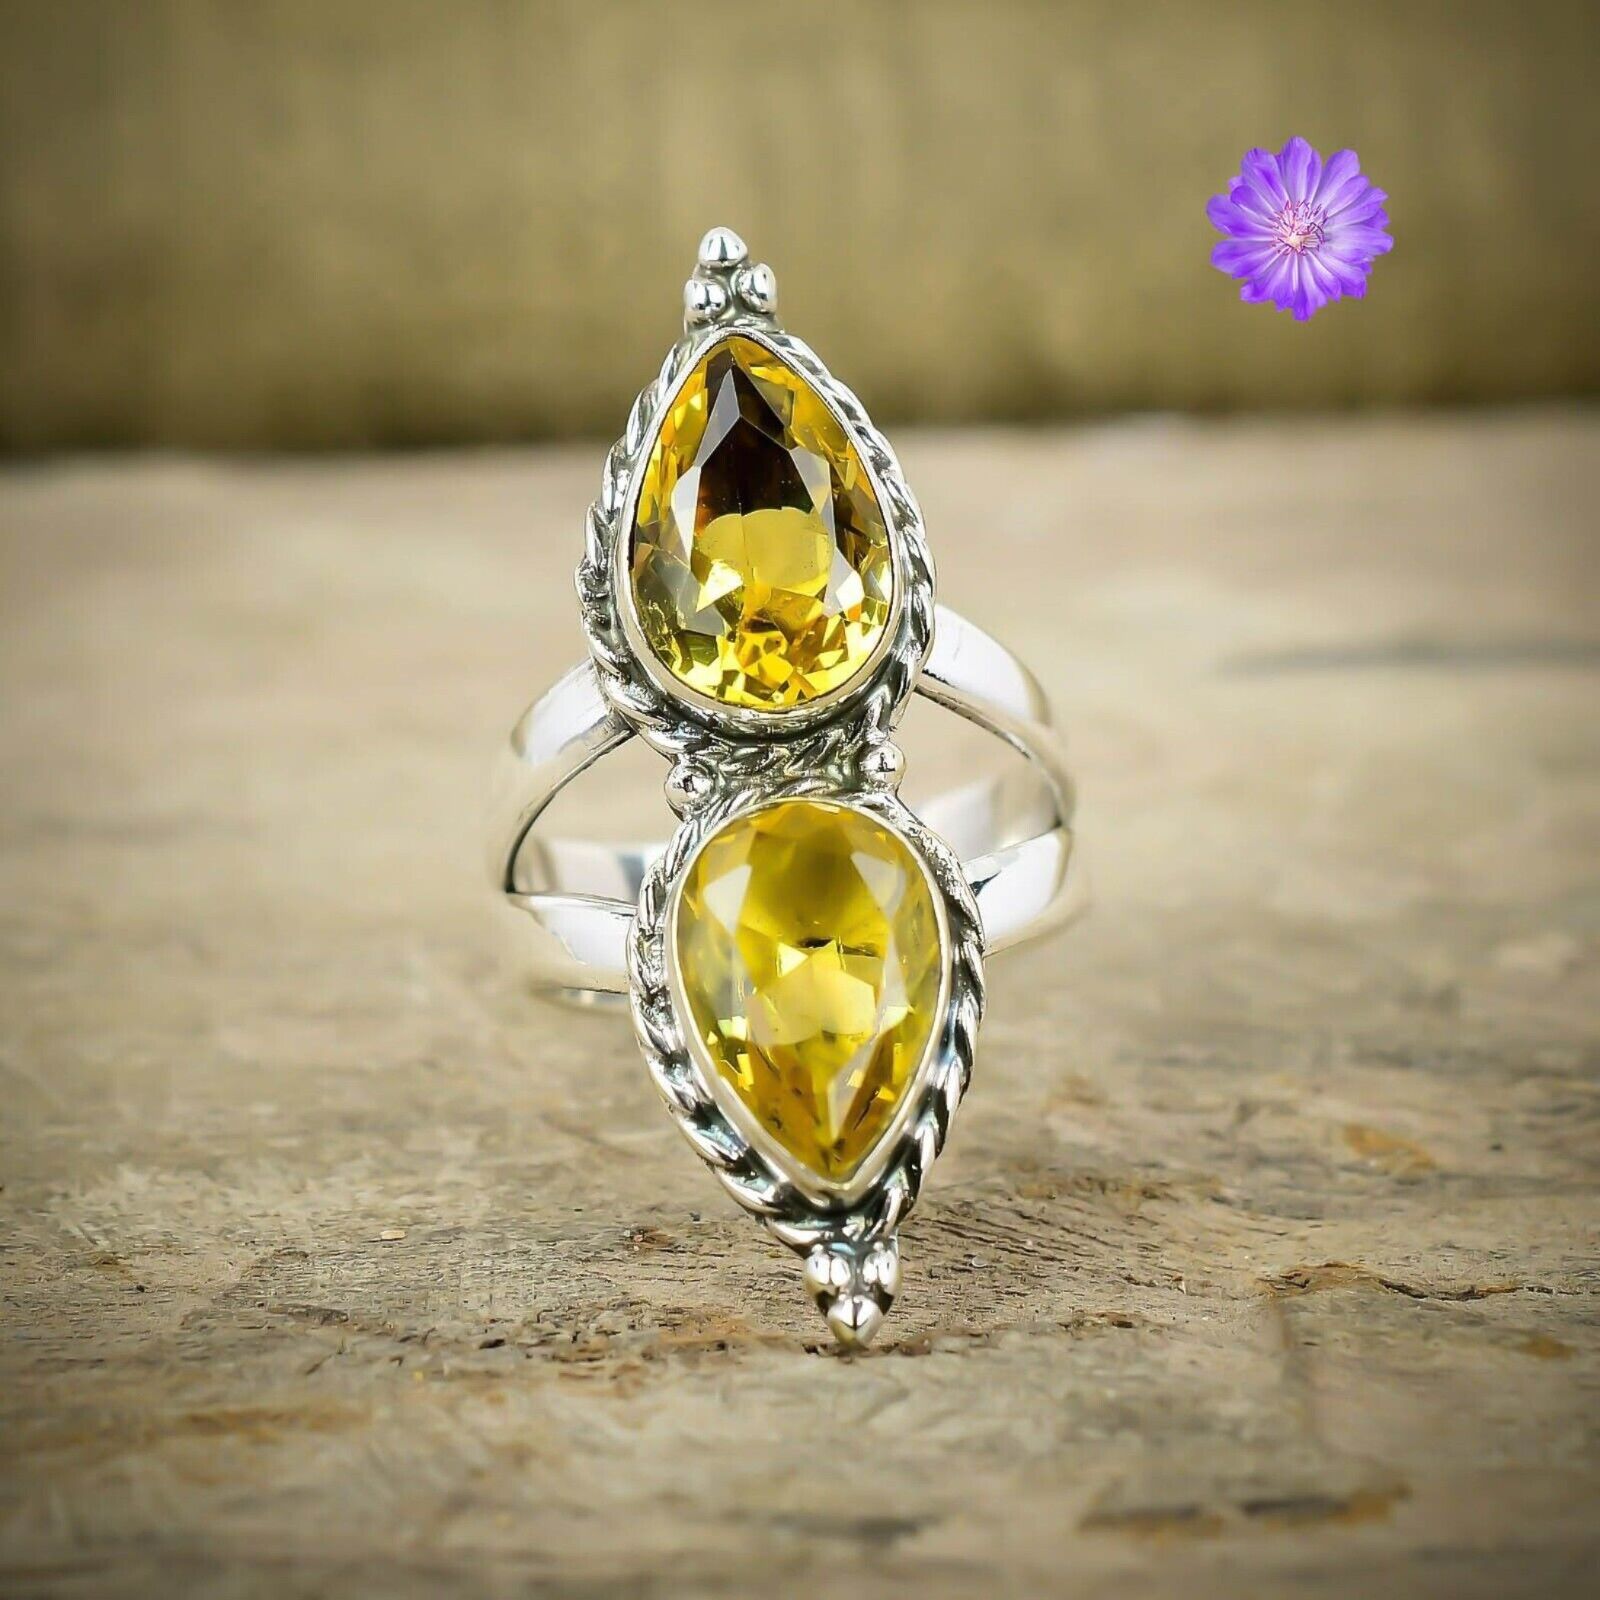 Citrine Gemstone 925 Silver Ring Handmade Jewelry Ring All Size